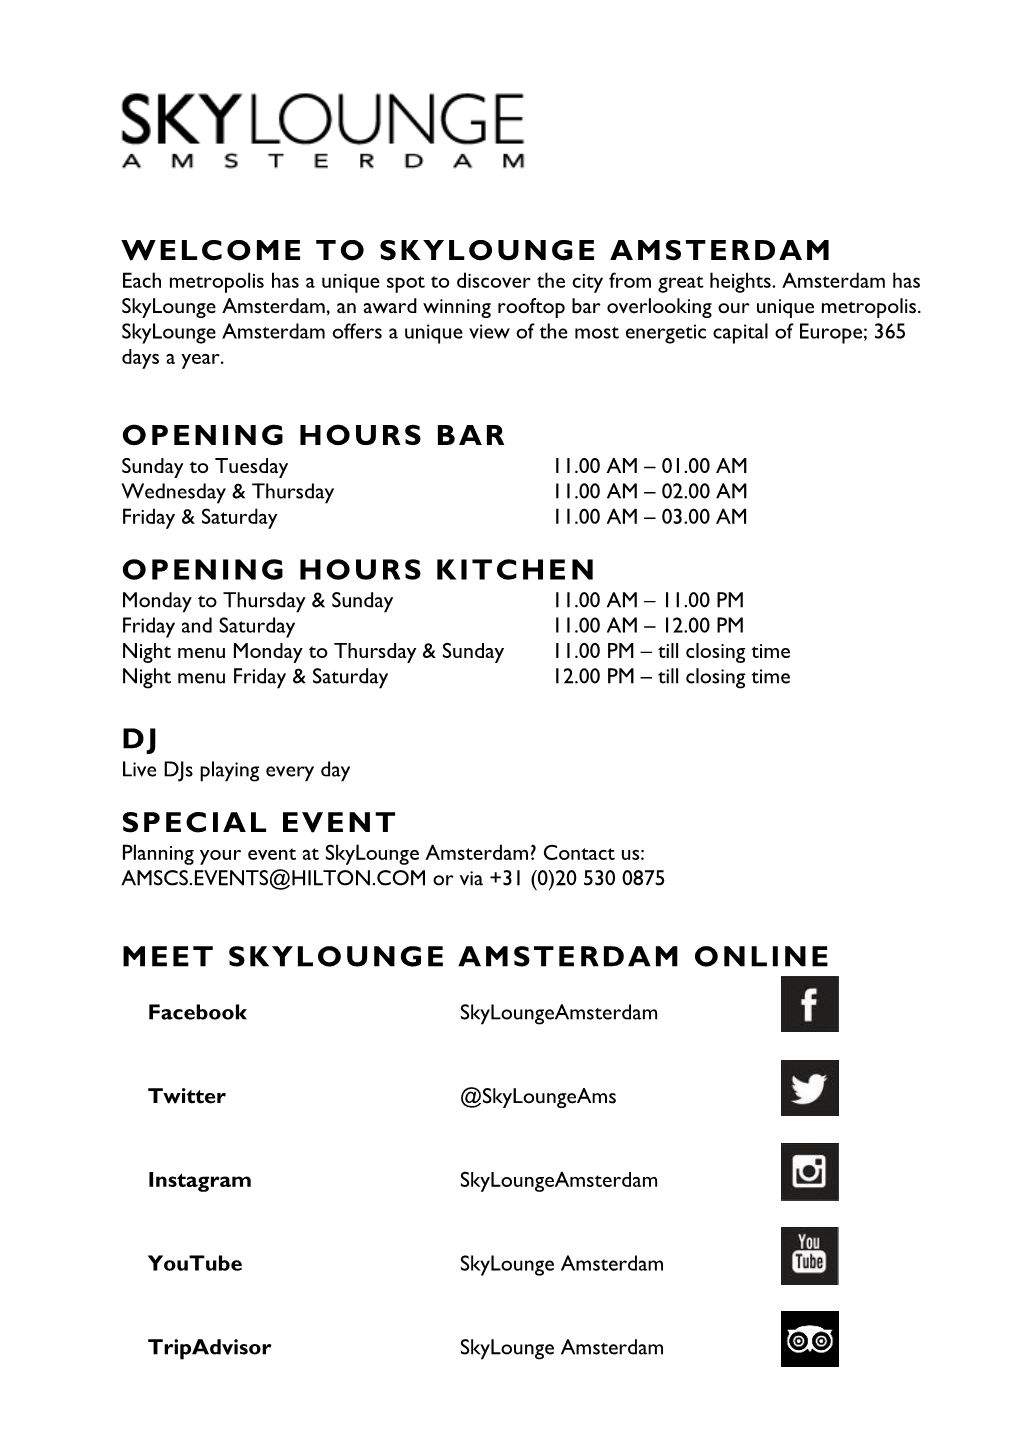 WELCOME to SKYLOUNGE AMSTERDAM Each Metropolis Has a Unique Spot to Discover the City from Great Heights